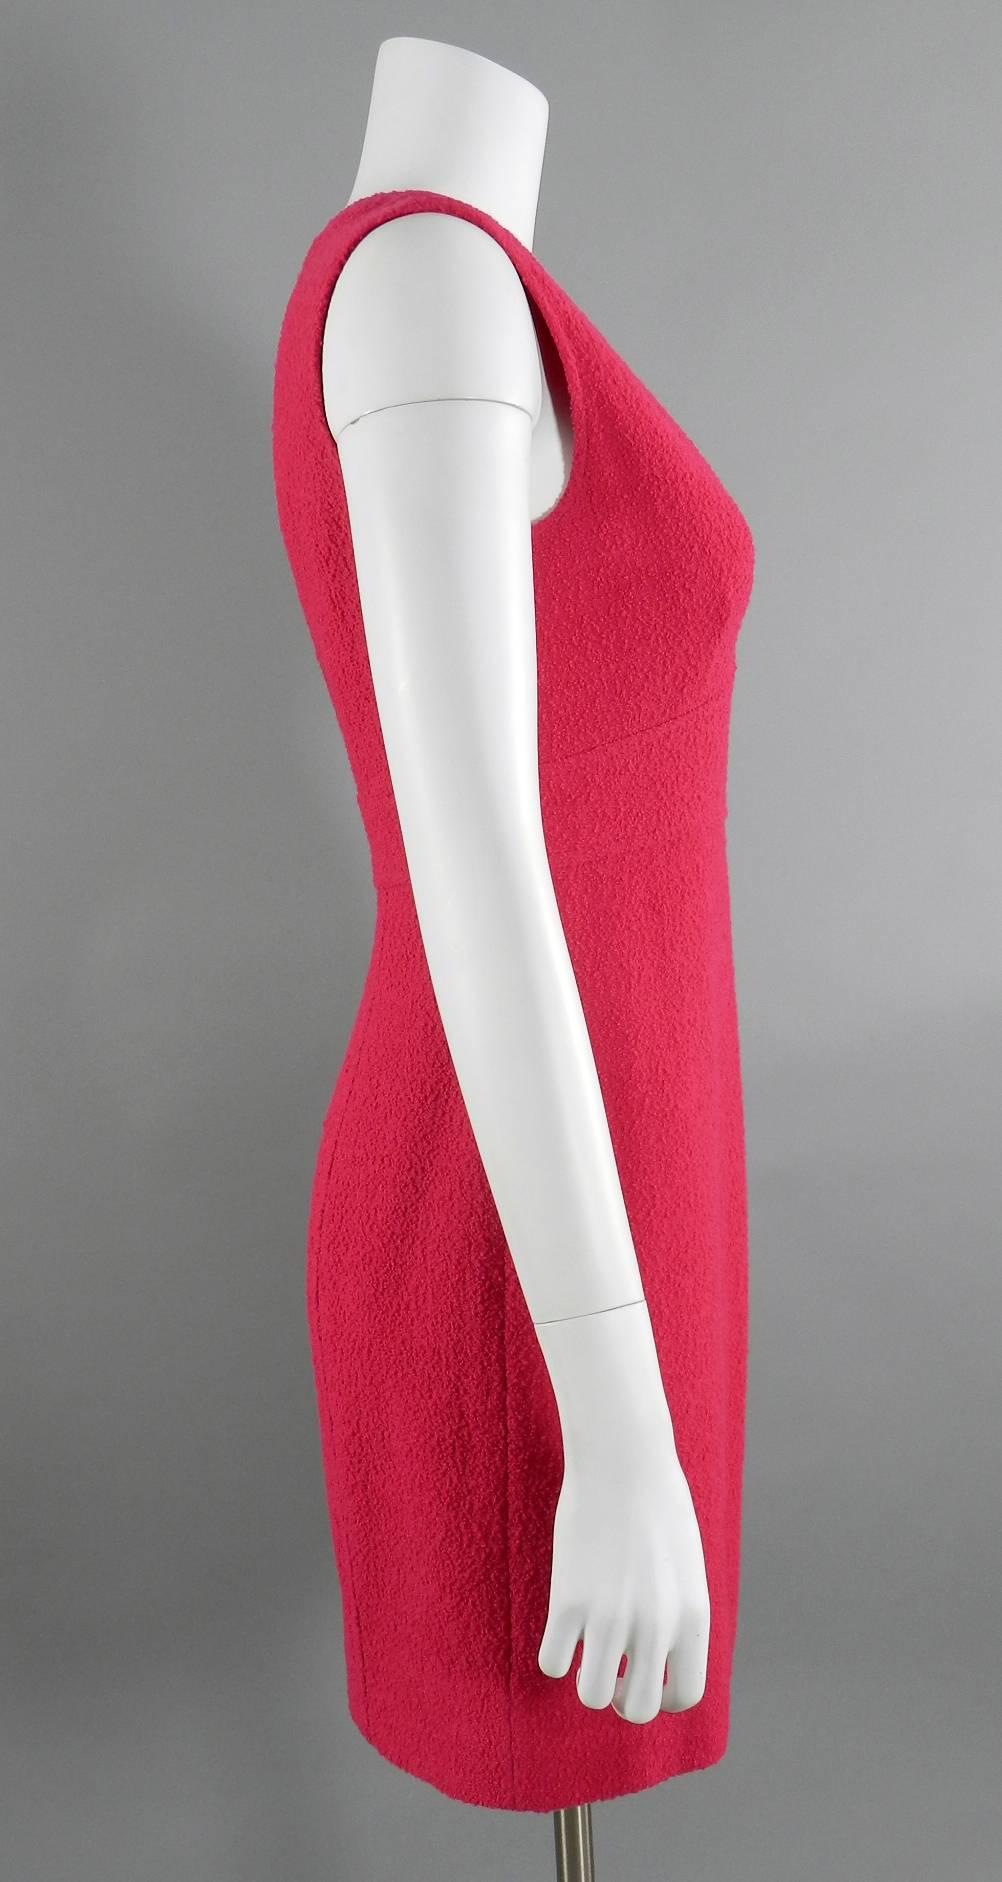 Chanel vintage 1995 fall / winter collection hot cherry pink boucle wool tank dress. Zippers up at centre back and is lined with silk. Excellent pre-owned / vintage condition. Tagged size FR 38 (but runs more like a modern FR 40 or best for USA 8).